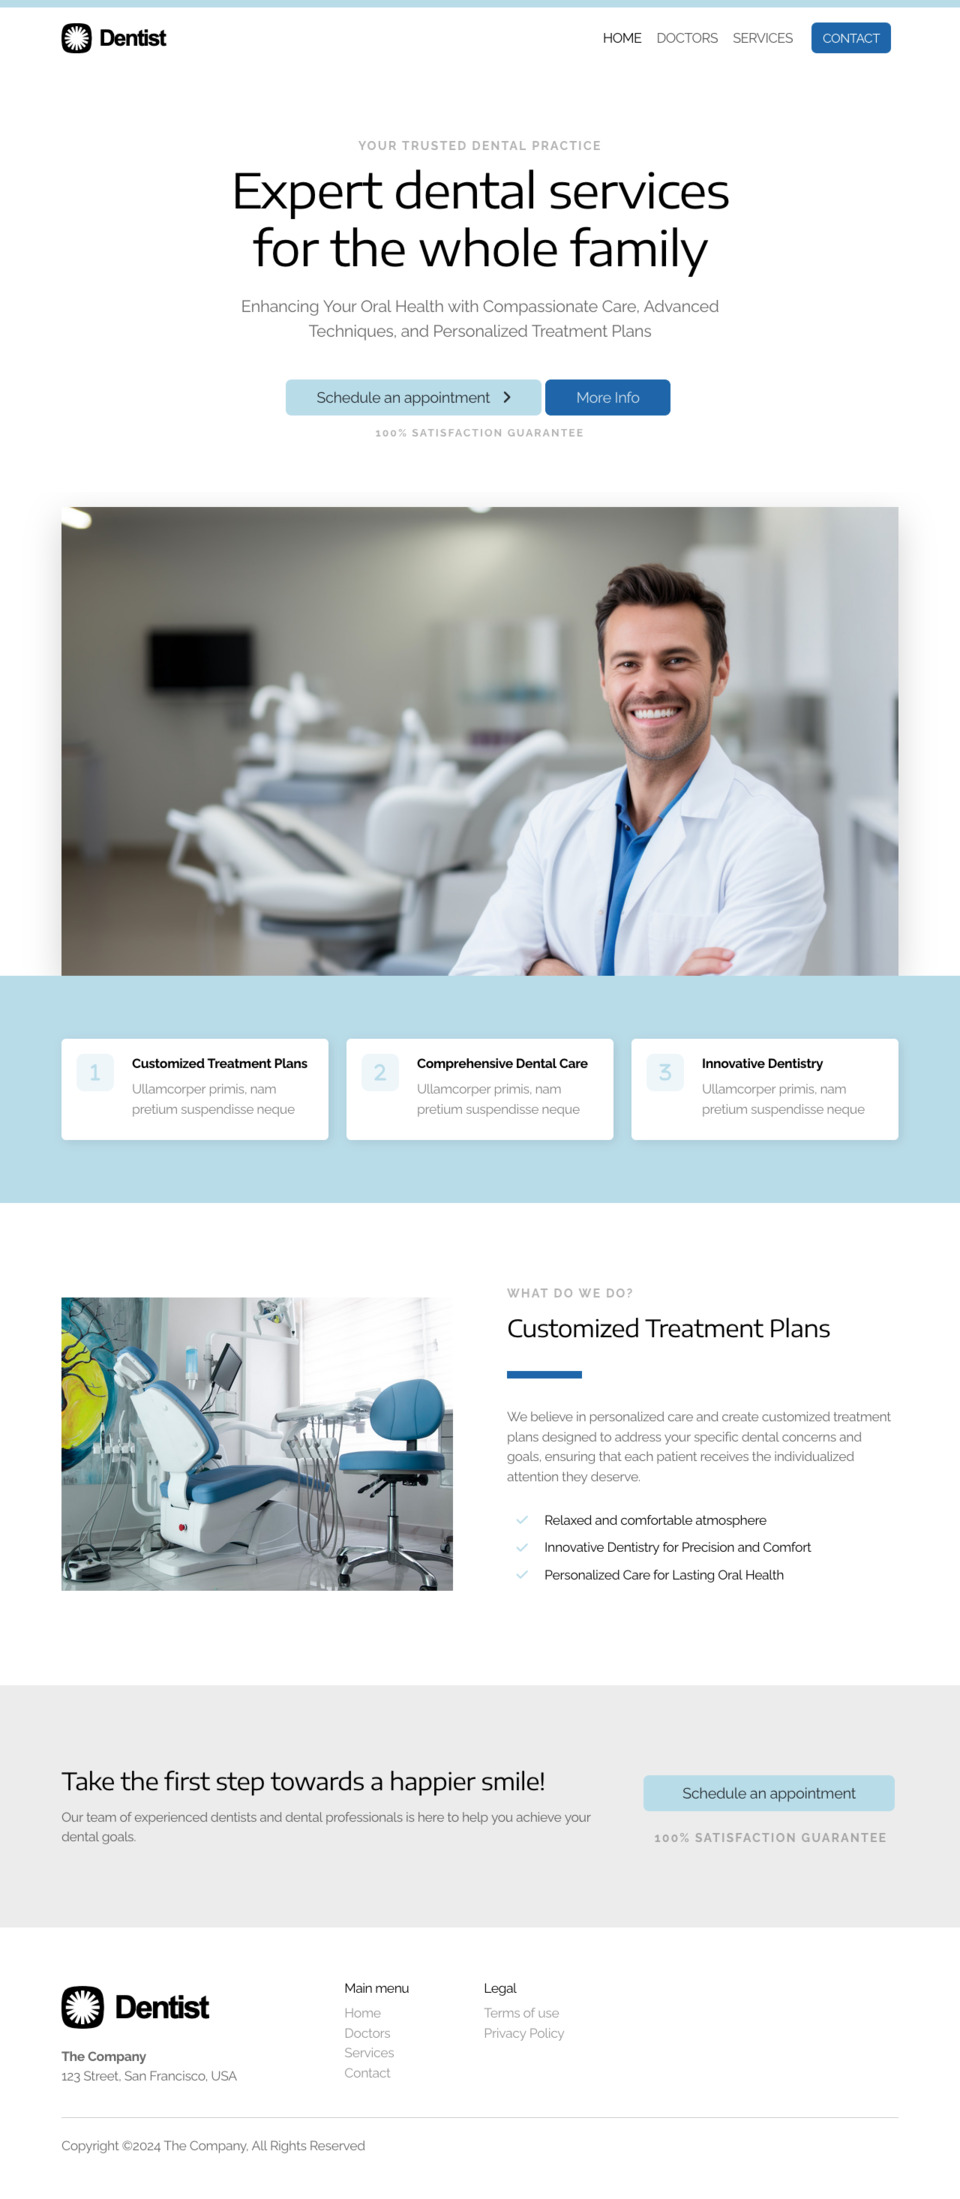 Dentist Website Template - Ideal for dentists, orthodontists, dental clinics, oral health professionals